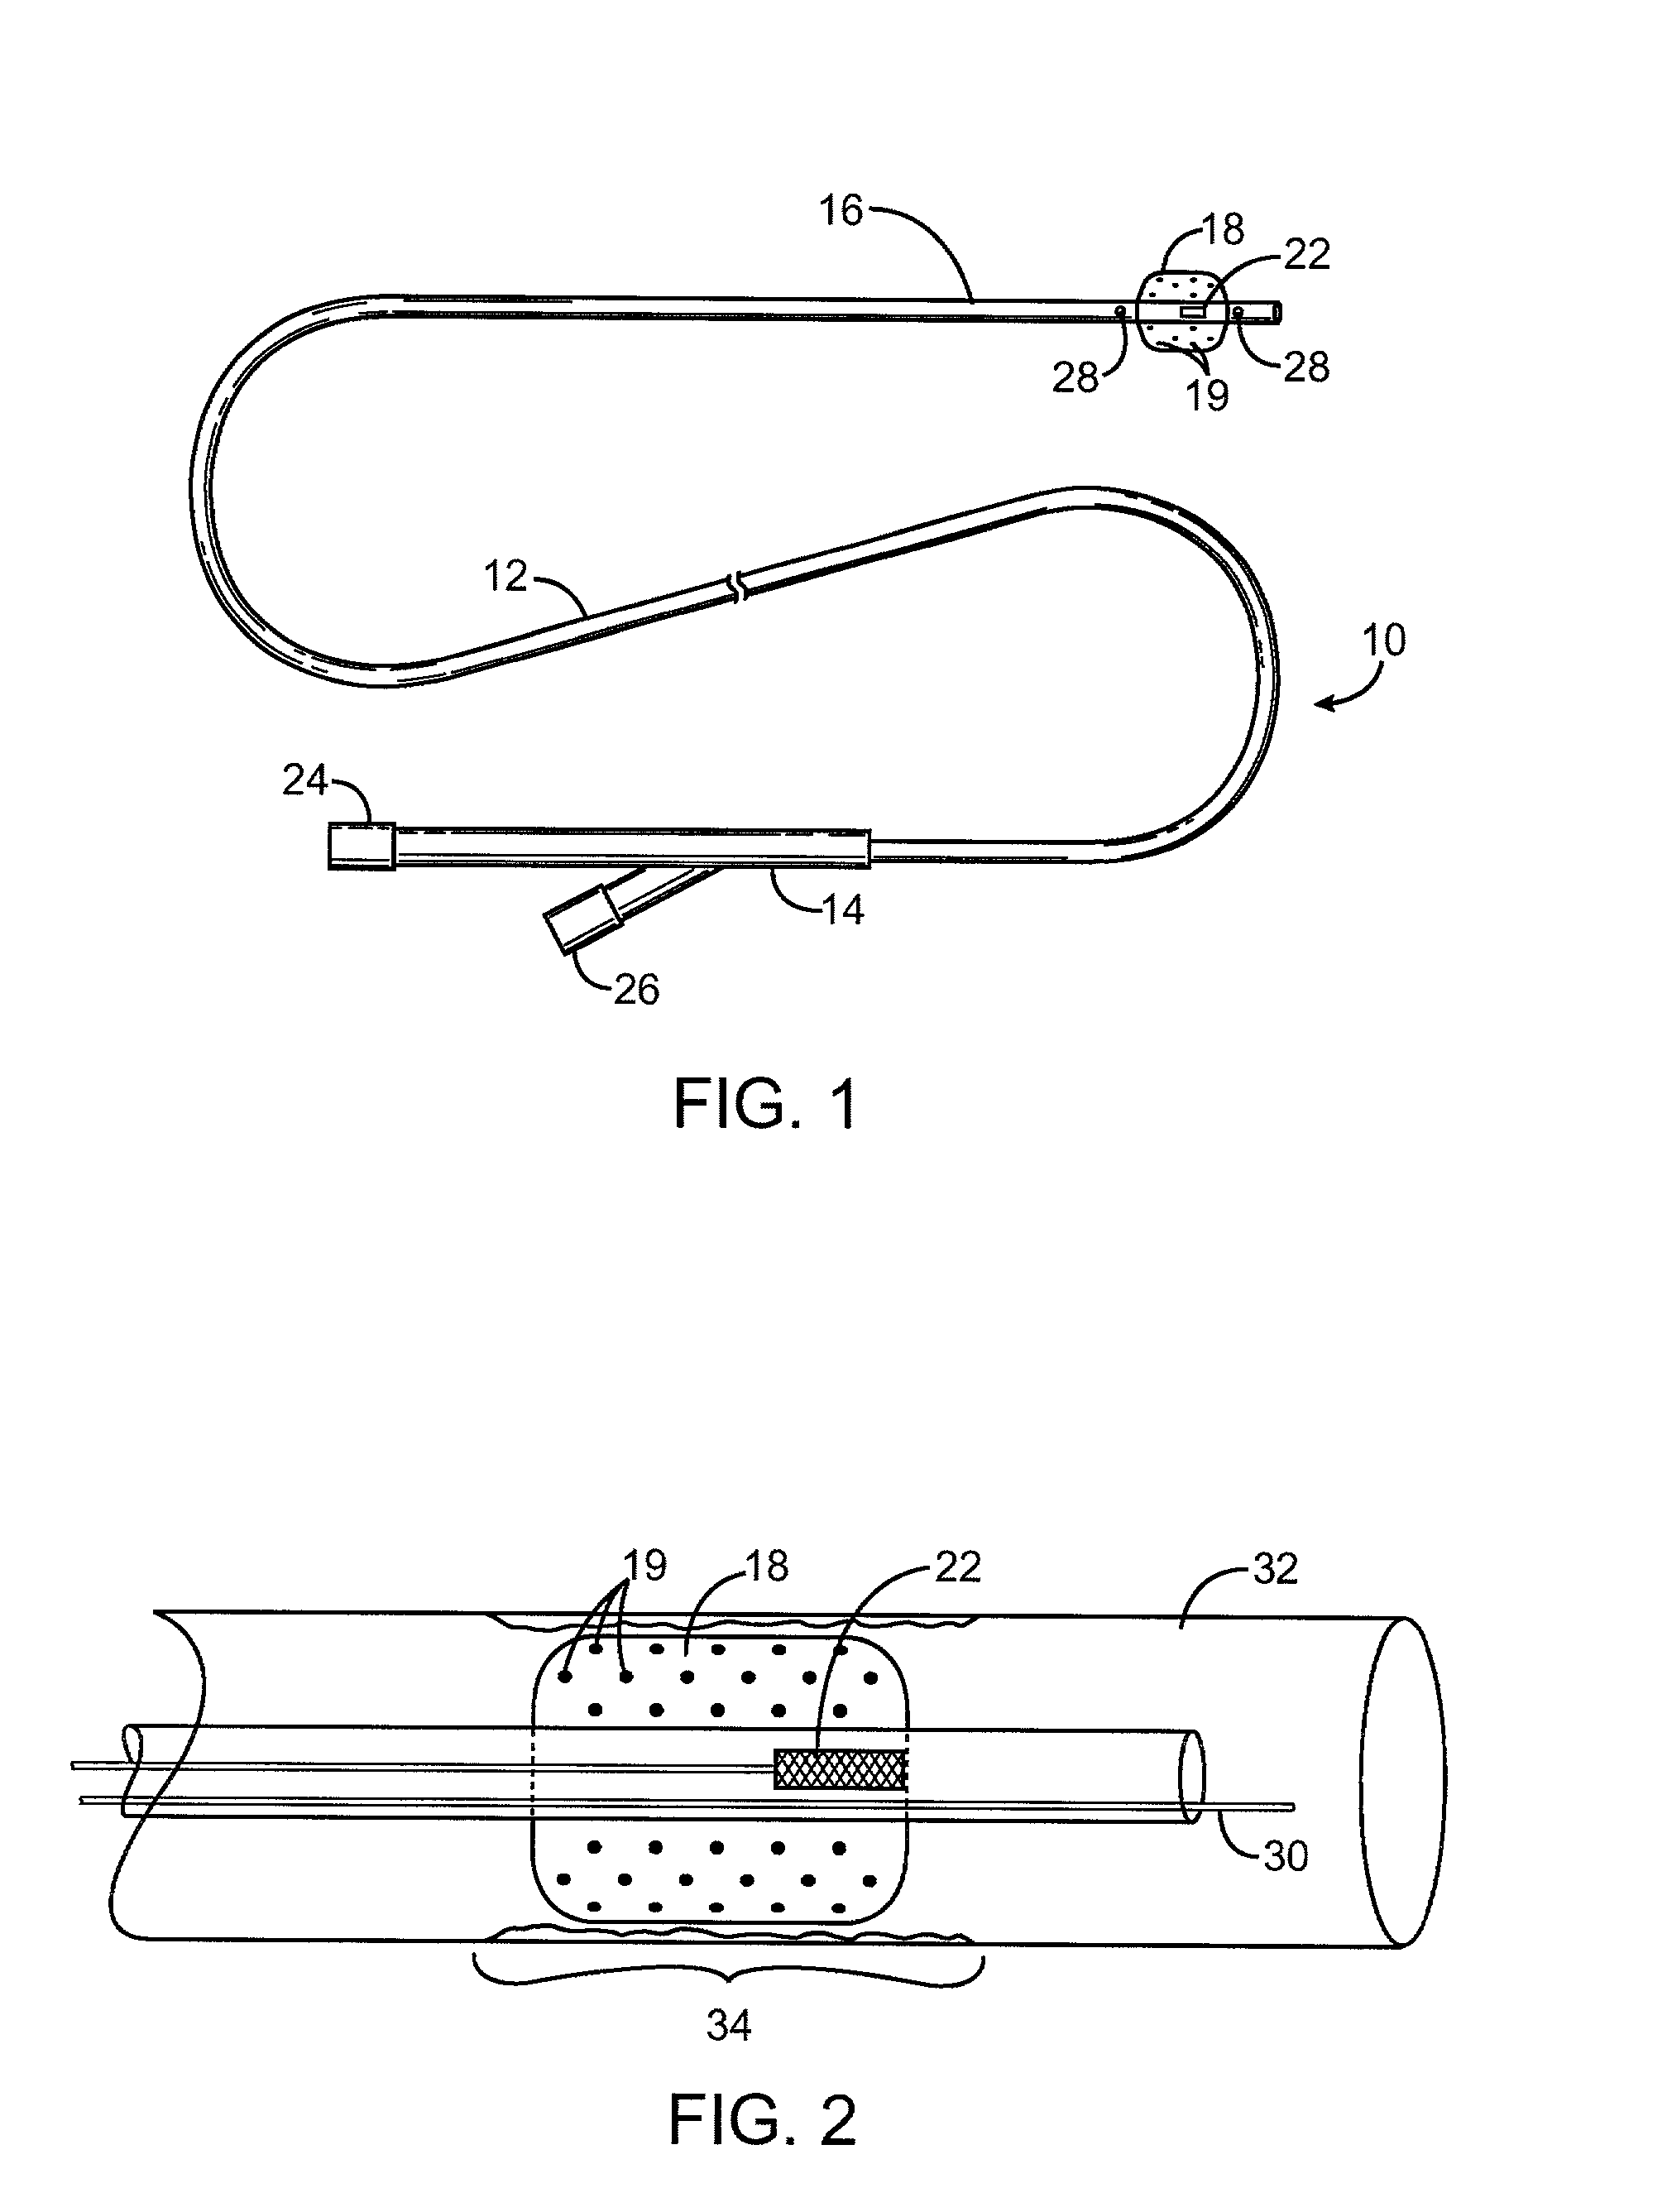 Combination x-ray radiation and drug delivery devices and methods for inhibiting hyperplasia